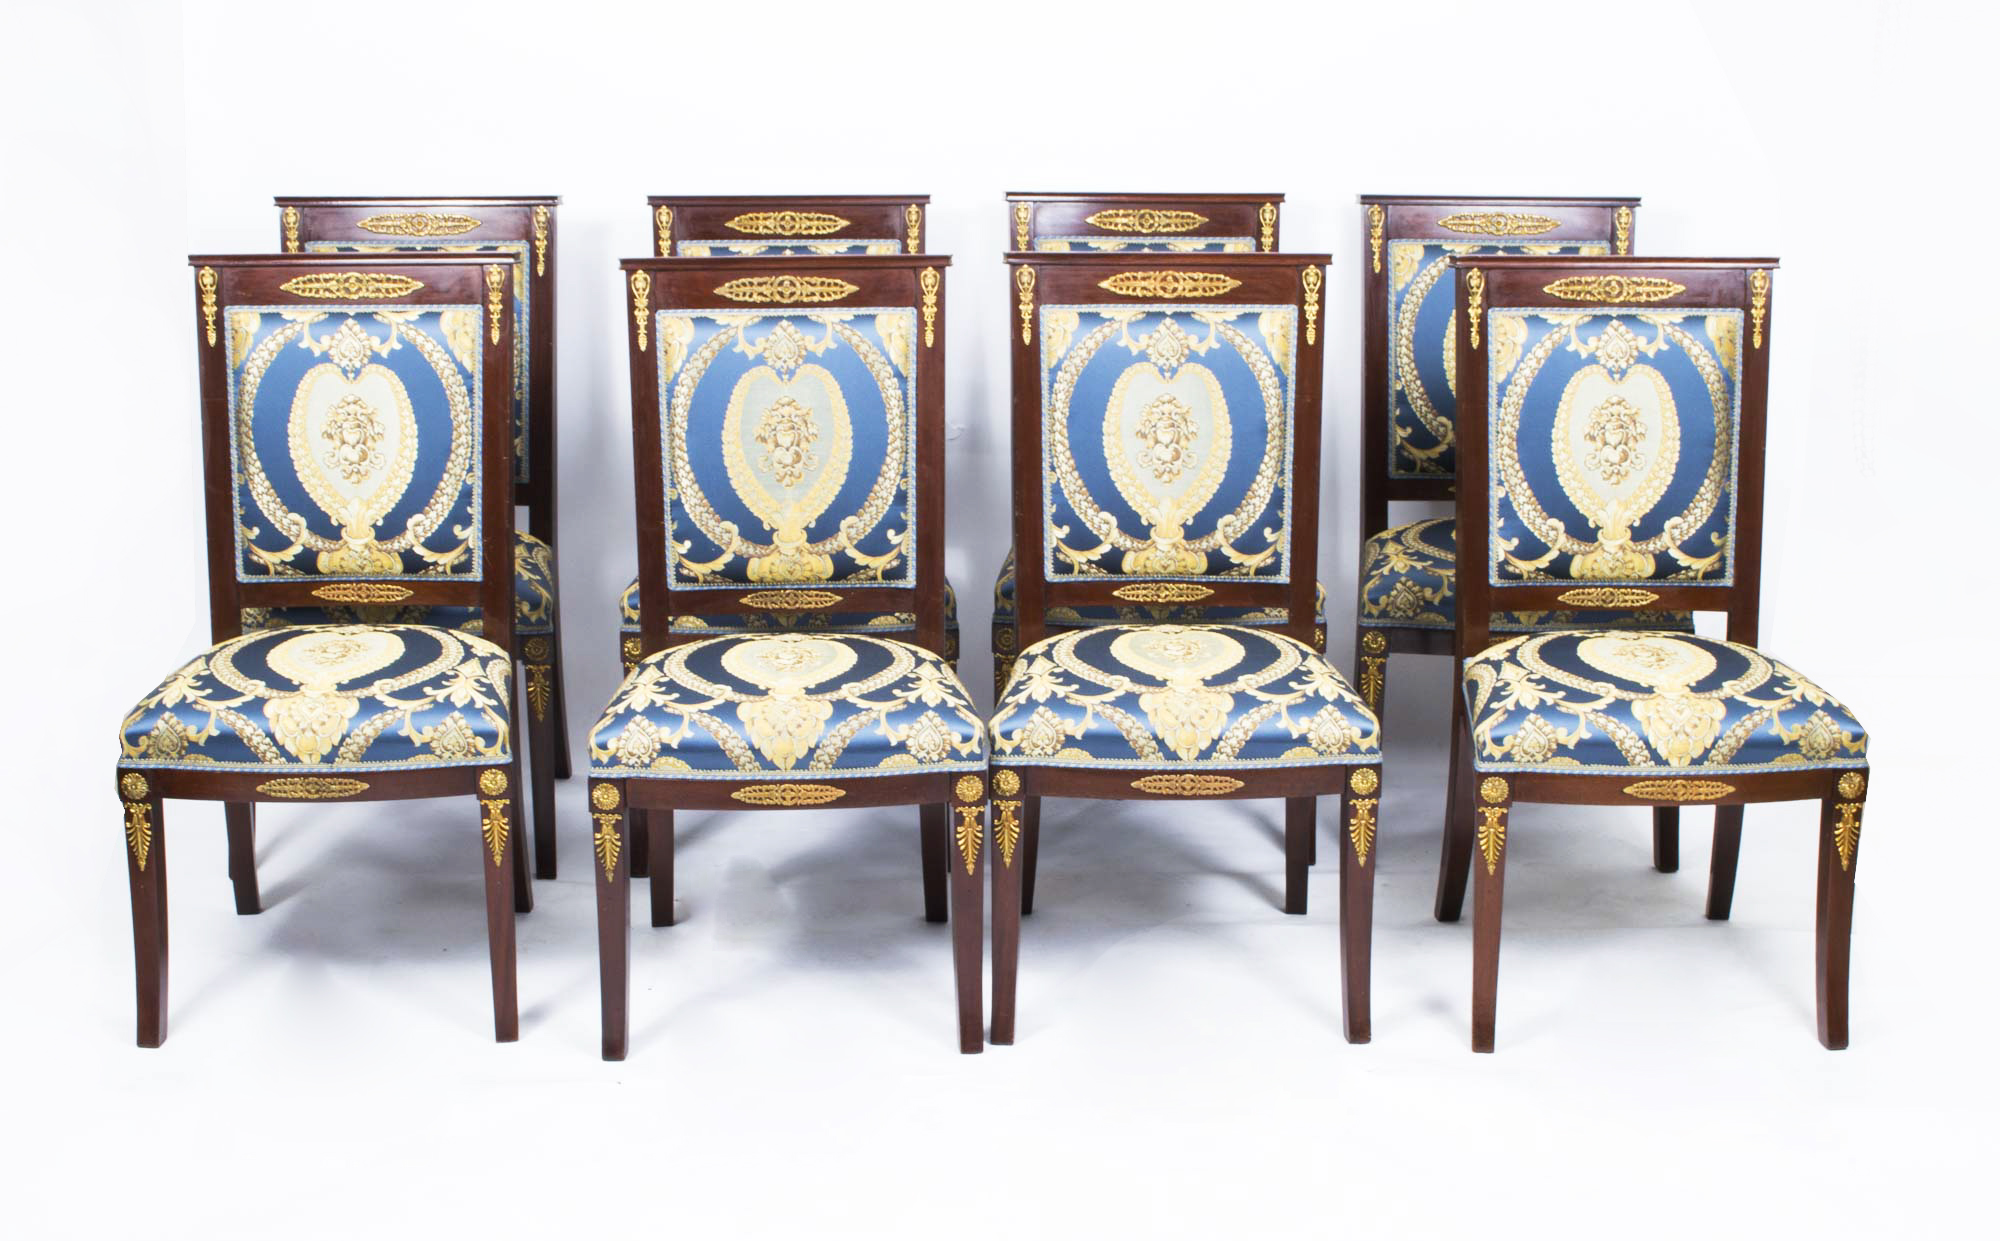 Antique Empire Style 8 Ref No 06162, Antique Empire Dining Chairs